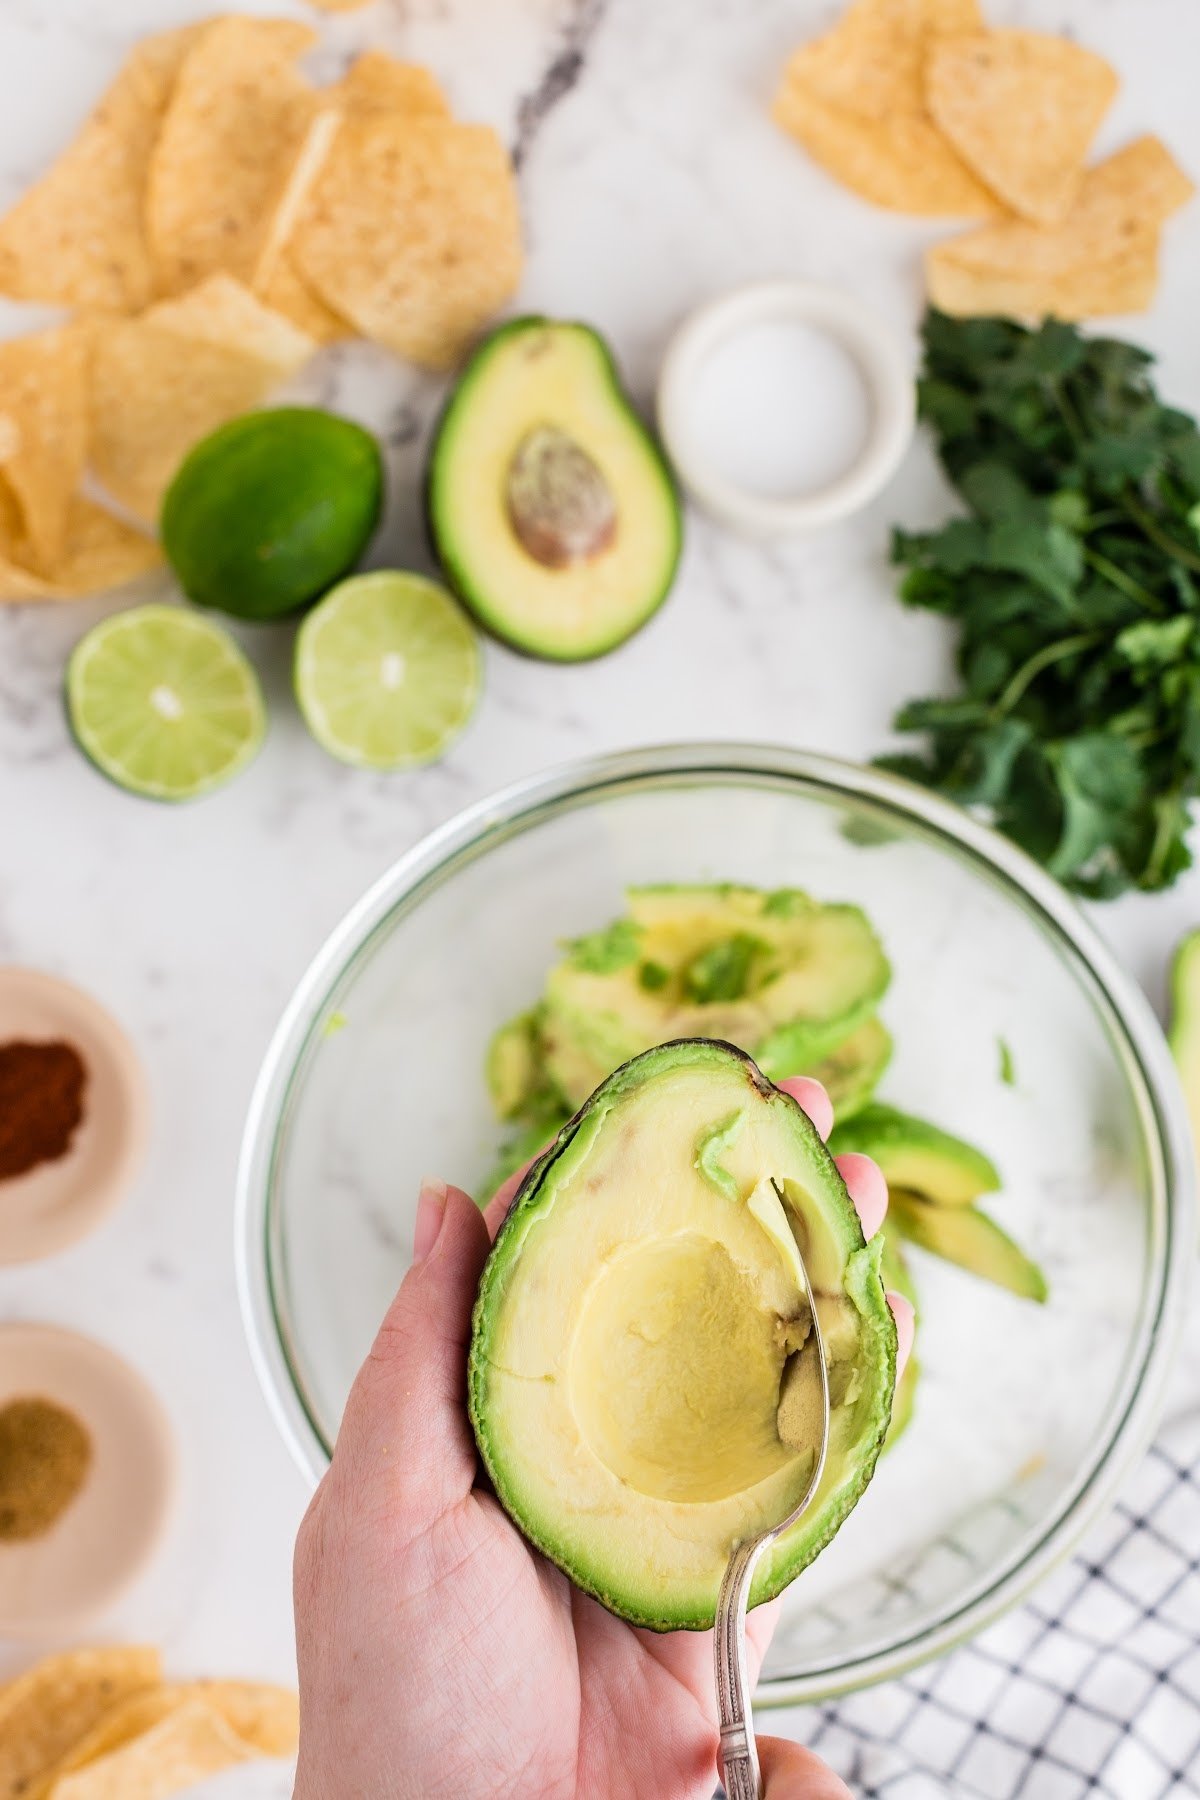 Large bowl with avocado being scooped into it, with ingredients off to the side too.